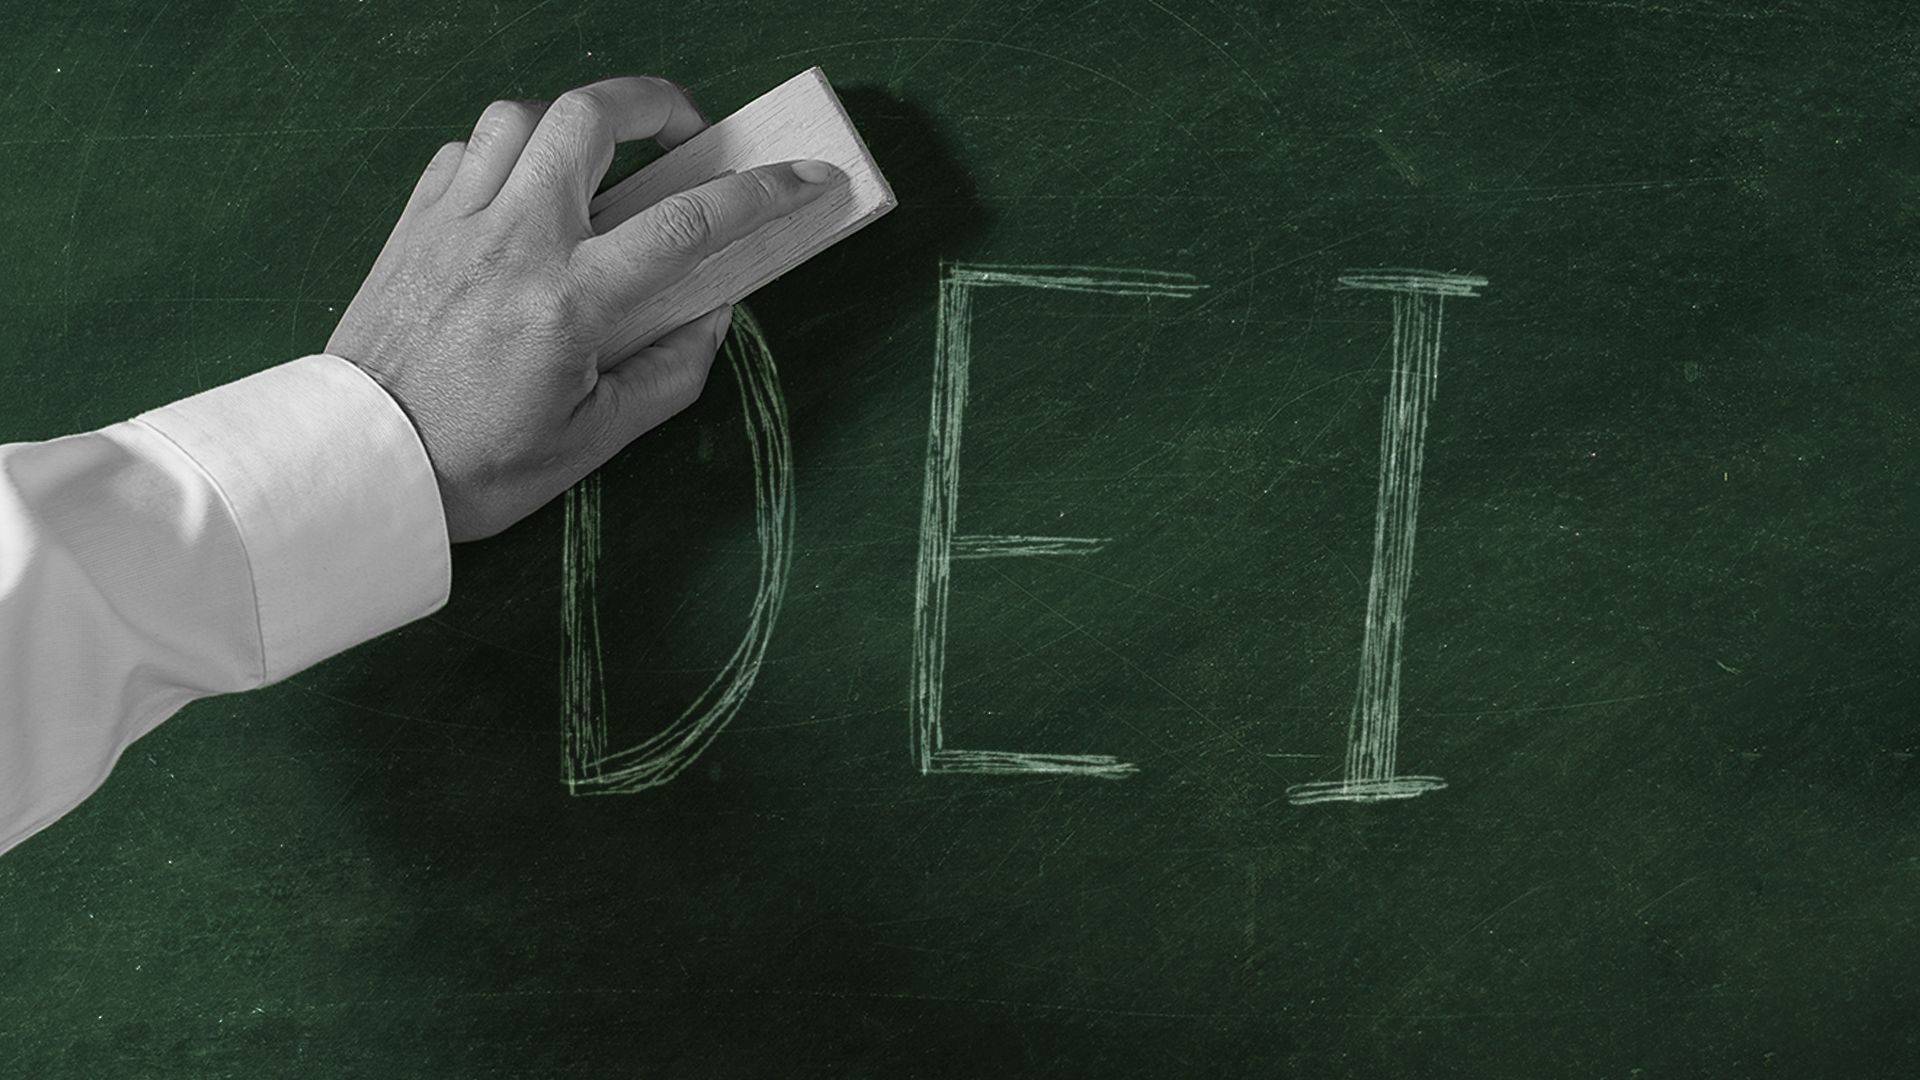 Illustration of a hand erasing the letters DEI from a chalkboard